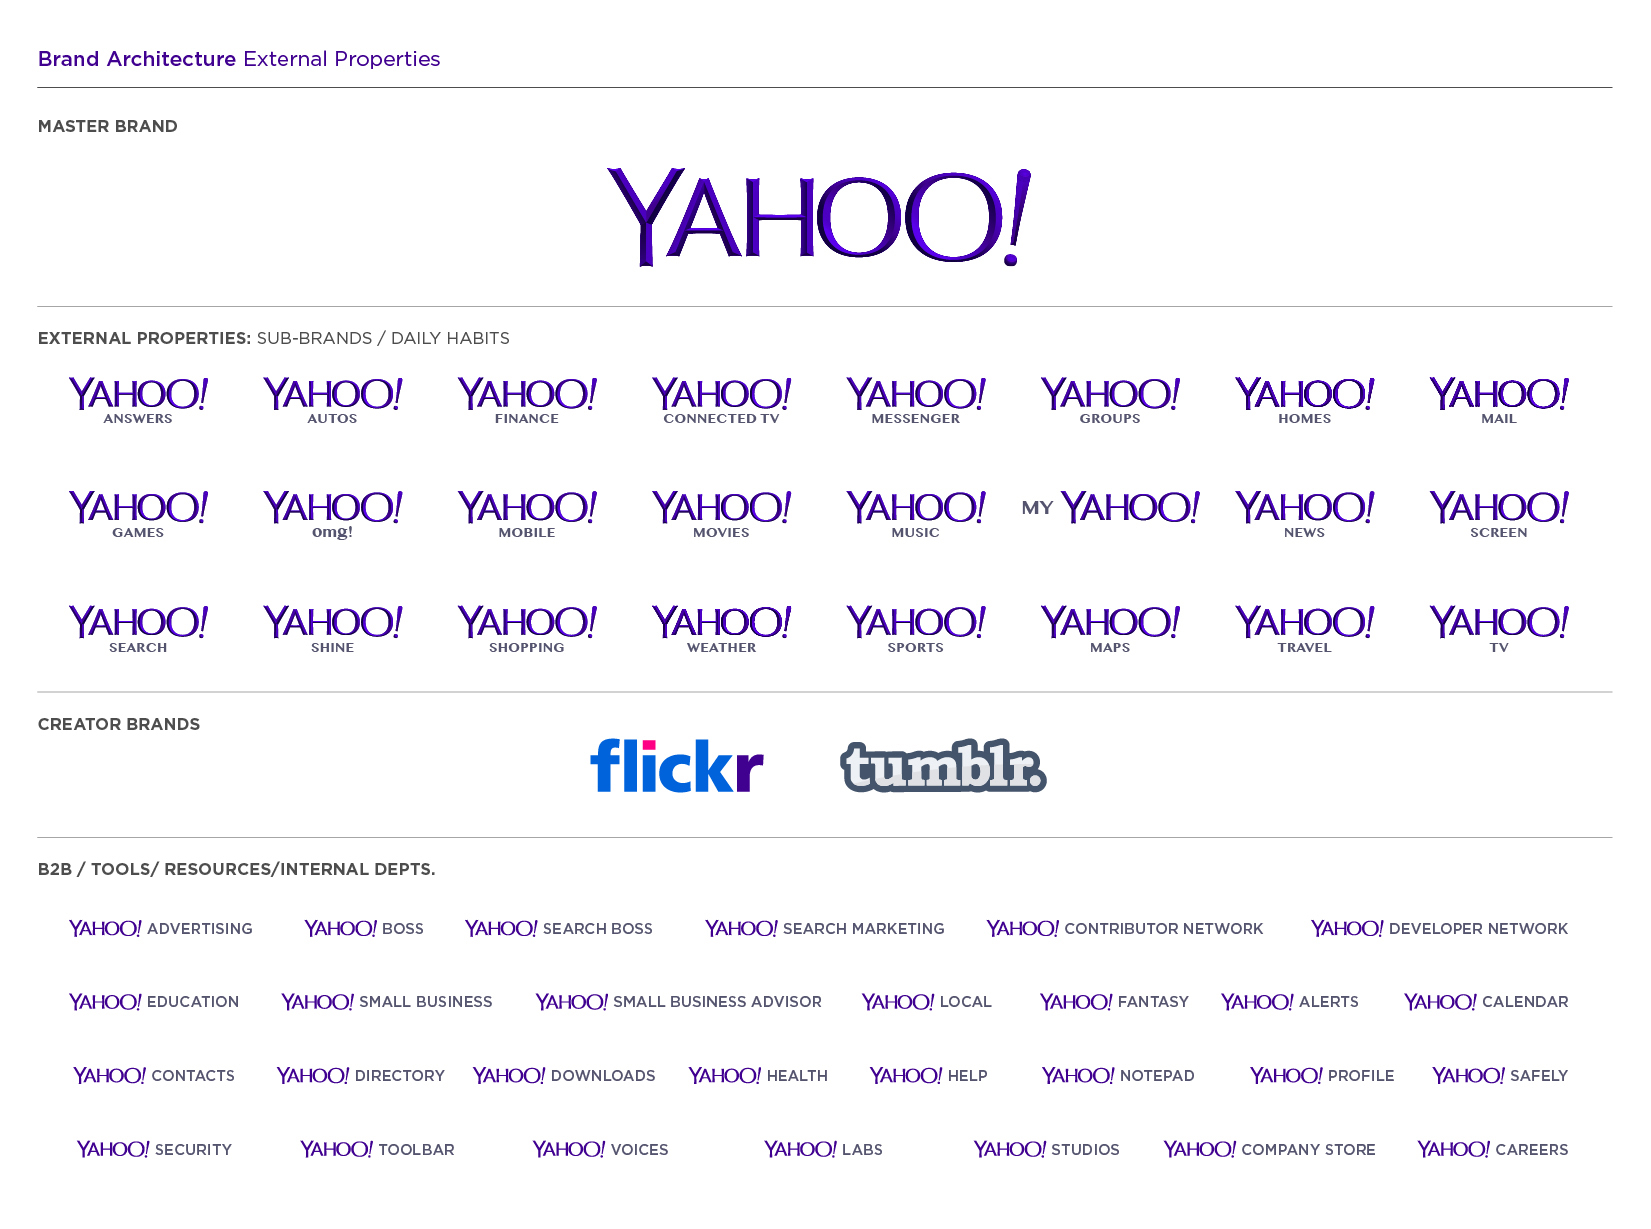 yahoo_brand_assets_archt-logos